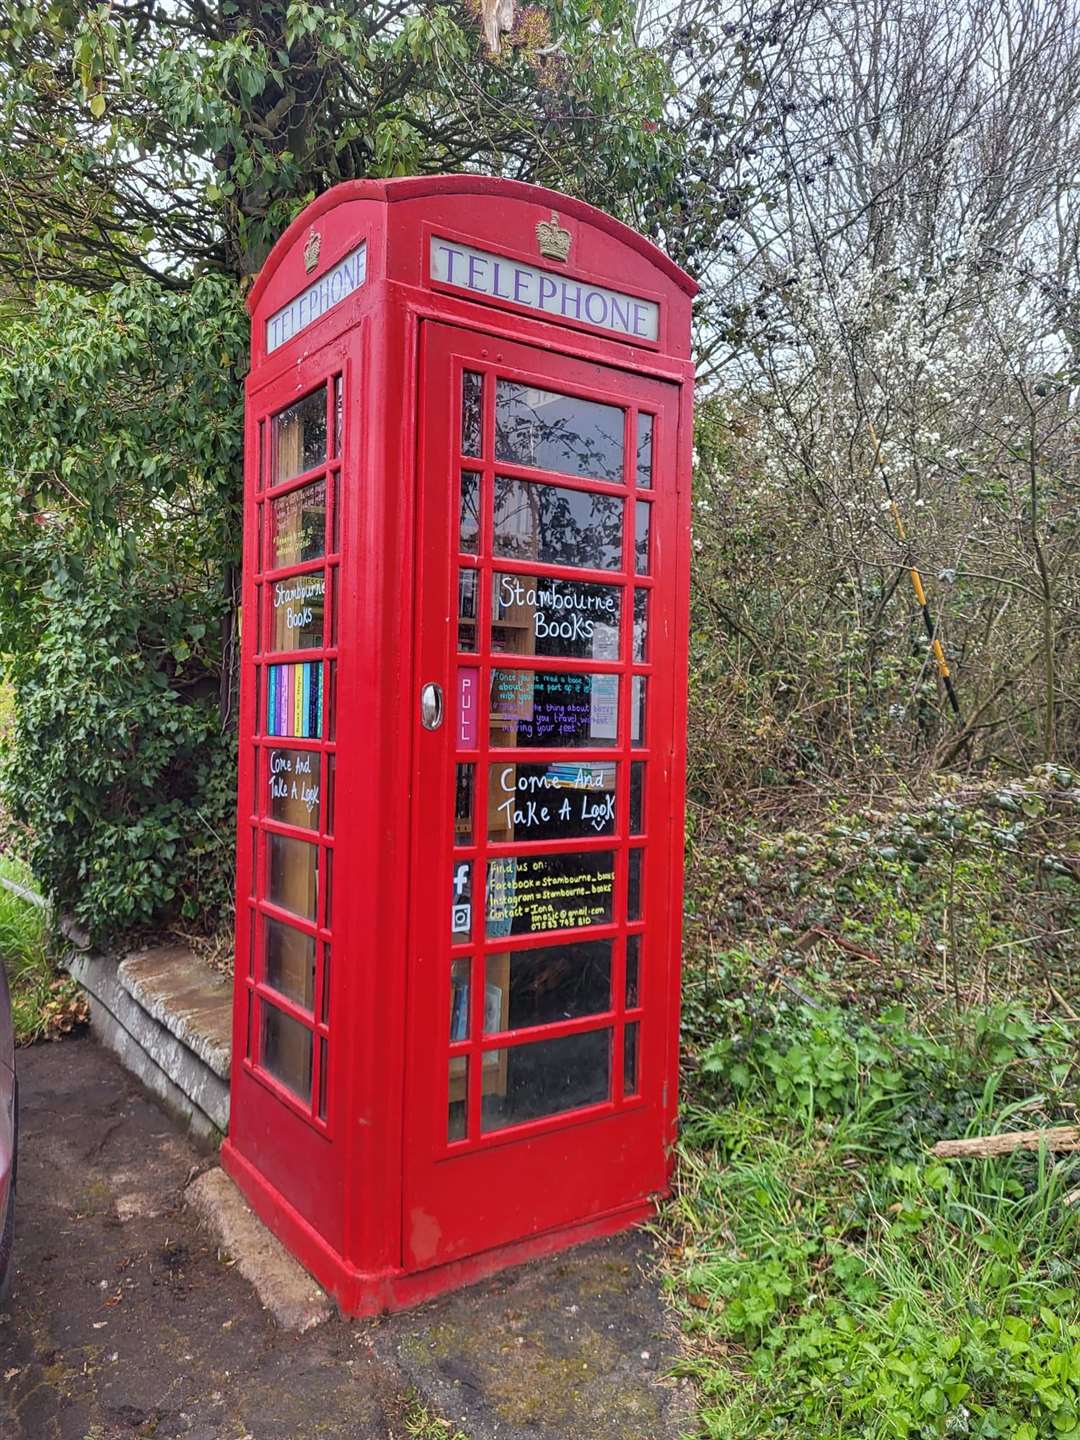 Ms Connolly acquired the telephone box in December 2022 (Iona Connolly/PA)